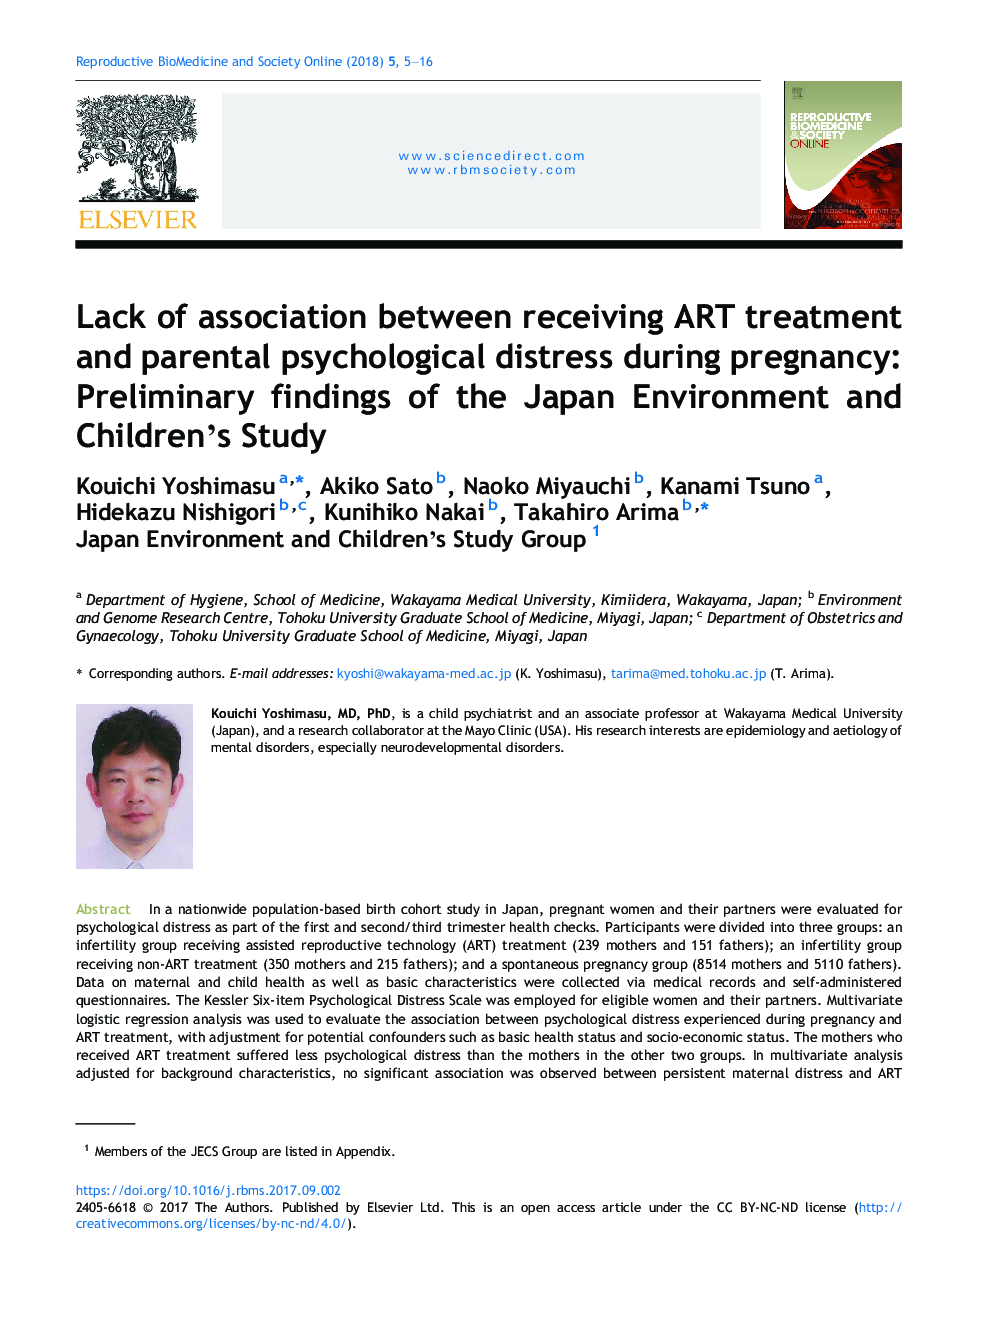 Lack of association between receiving ART treatment and parental psychological distress during pregnancy: Preliminary findings of the Japan Environment and Children's Study